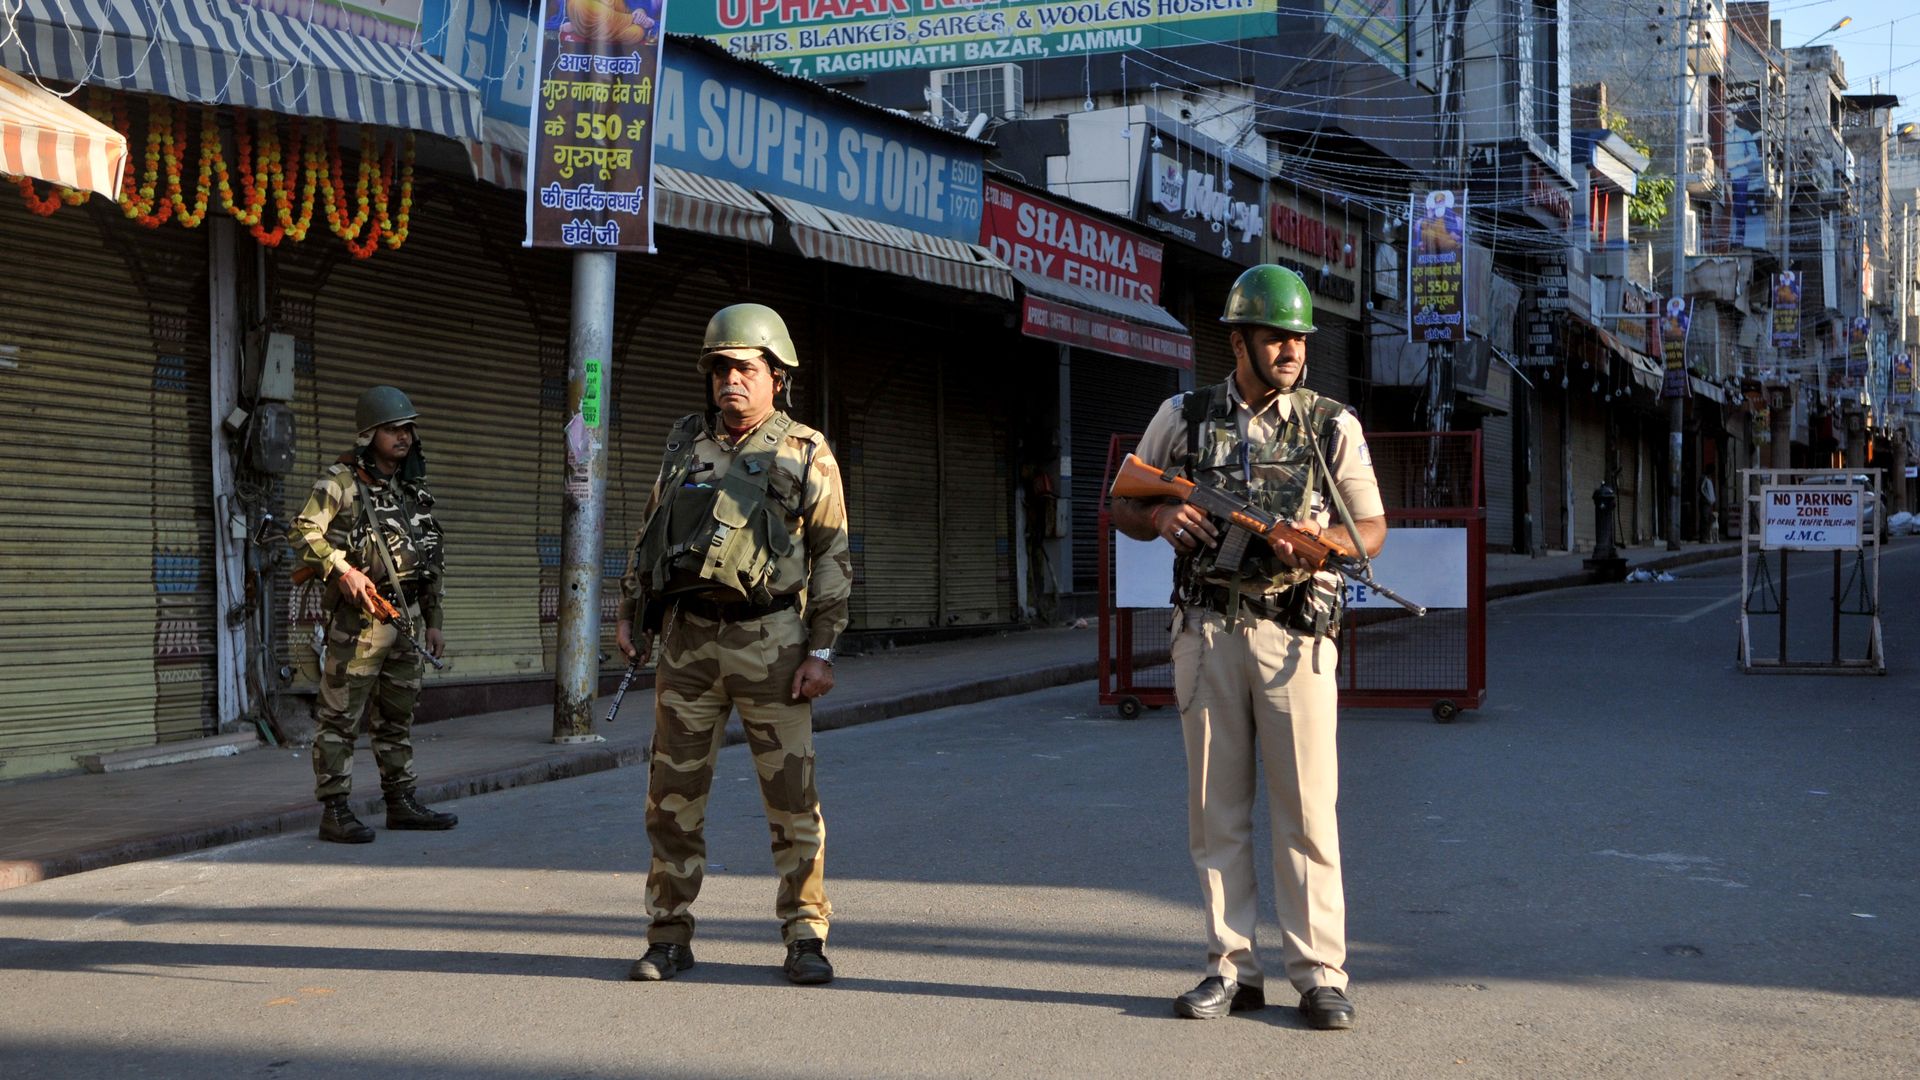 Security in India ahead of a Supreme Court decision